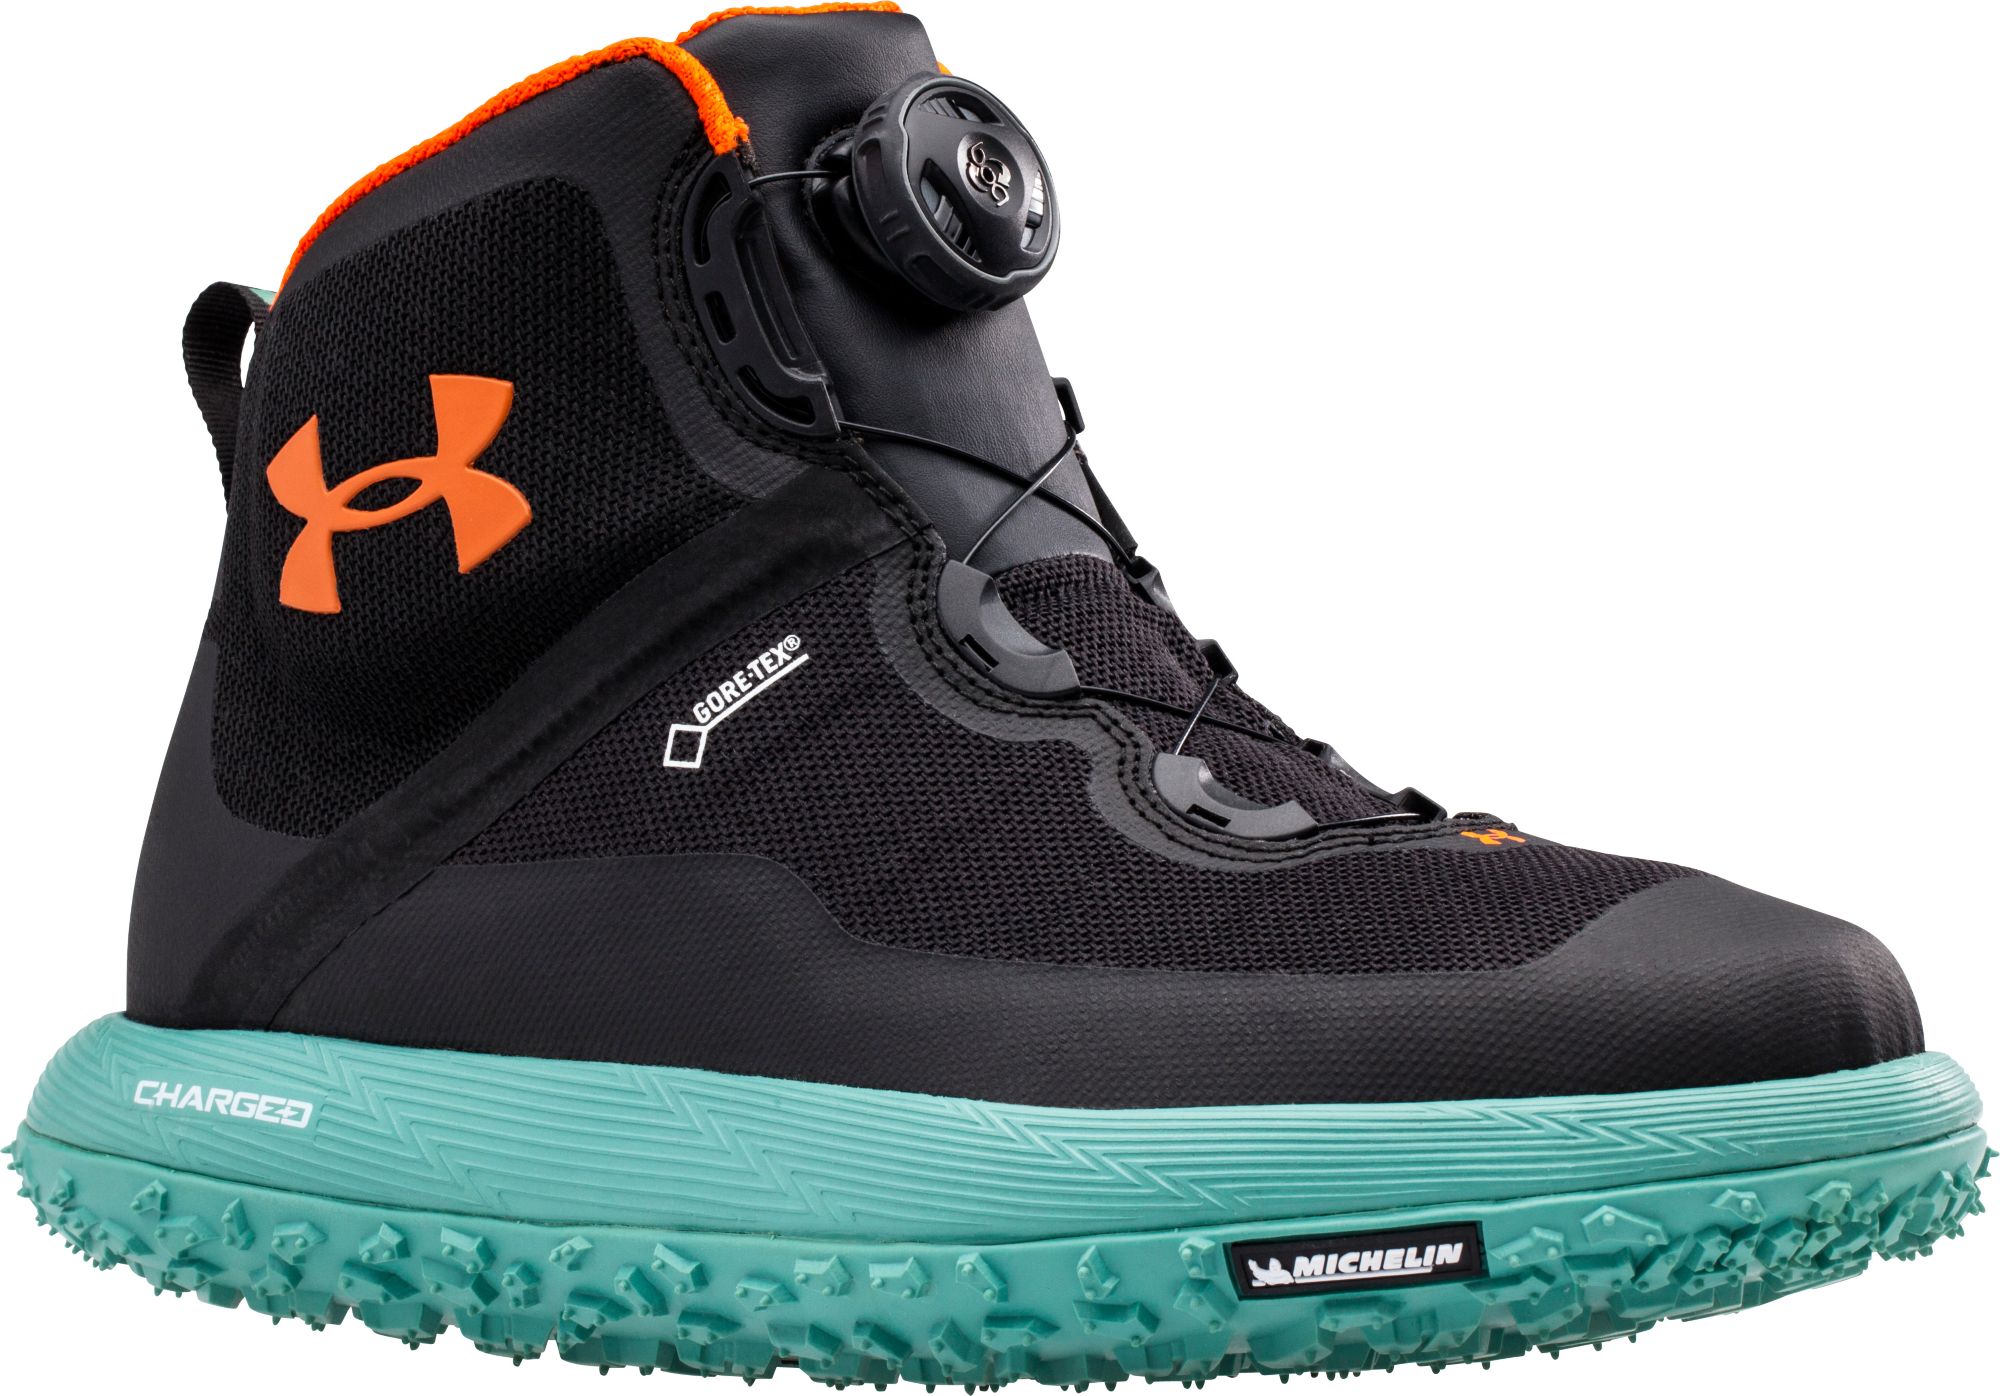 Under Armour Men's Fat Tire GORE-TEX Hiking Boots | DICK'S Sporting Goods